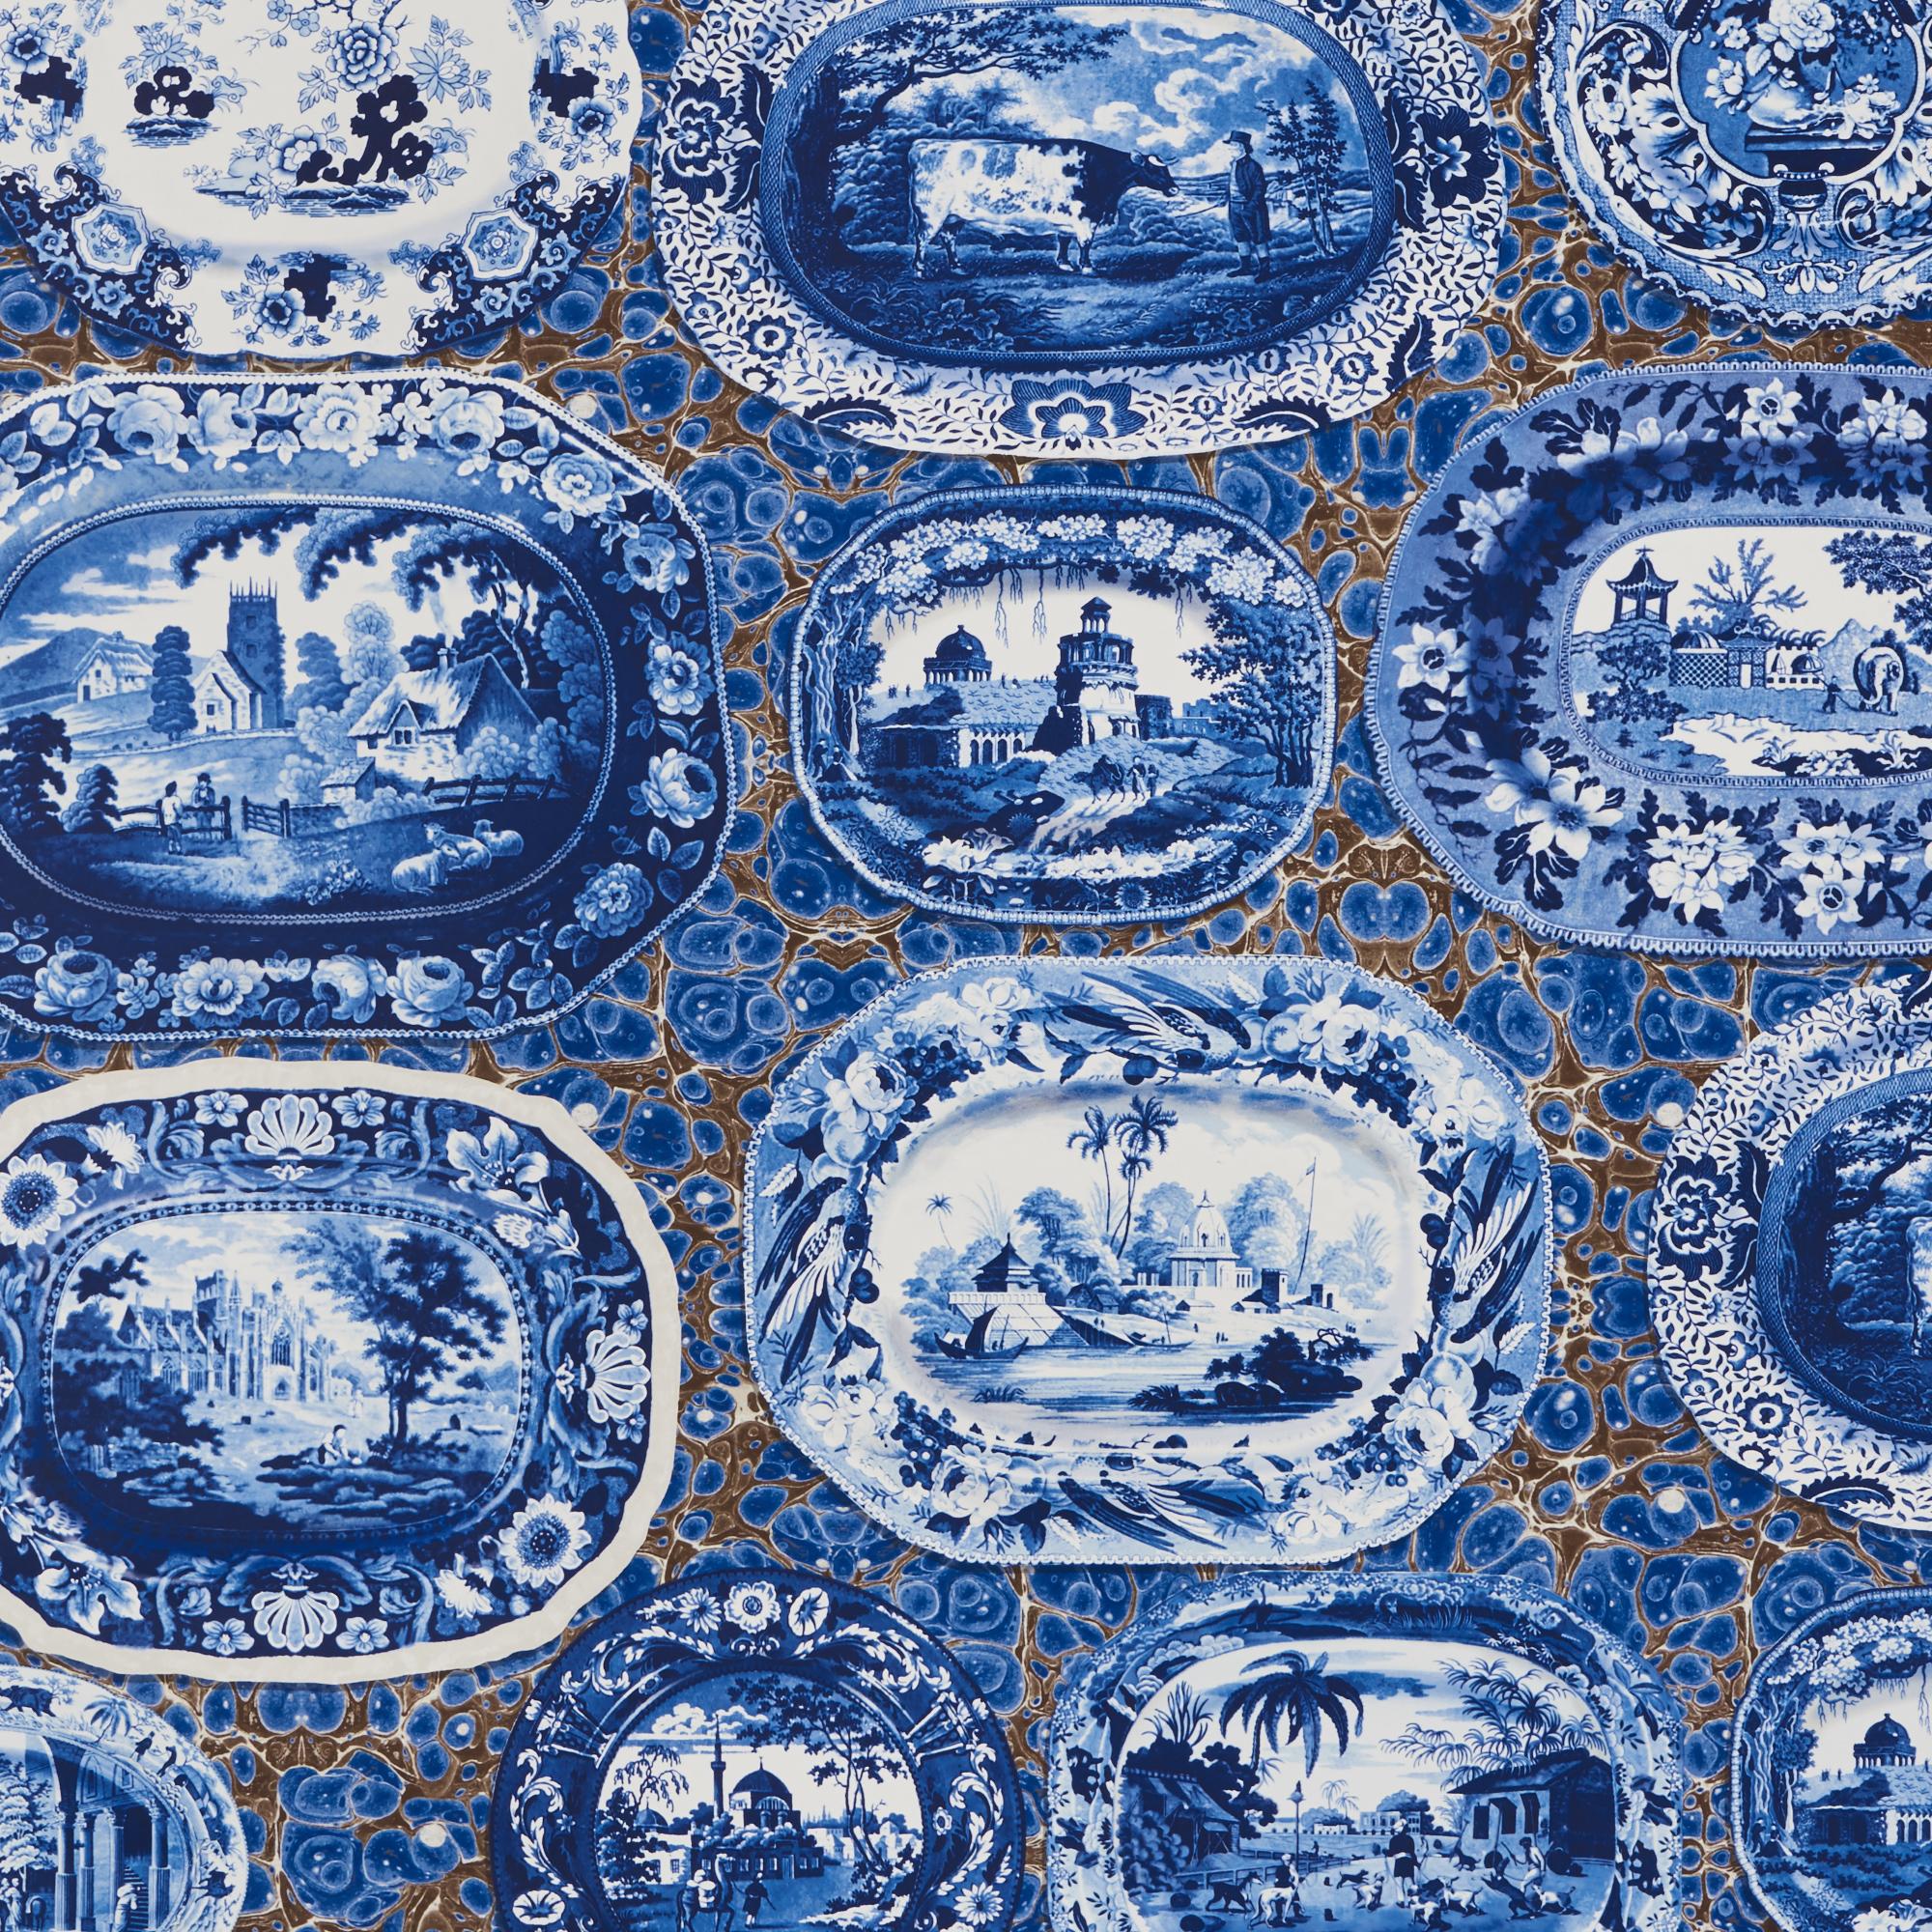 A trompe l’oeil pattern of transfer ware serving dishes mounted on a marbleized backdrop creates the ultimate layered illusion and instant drama, no hammers or nails required.

Since Schumacher was founded in 1889, our family-owned company has